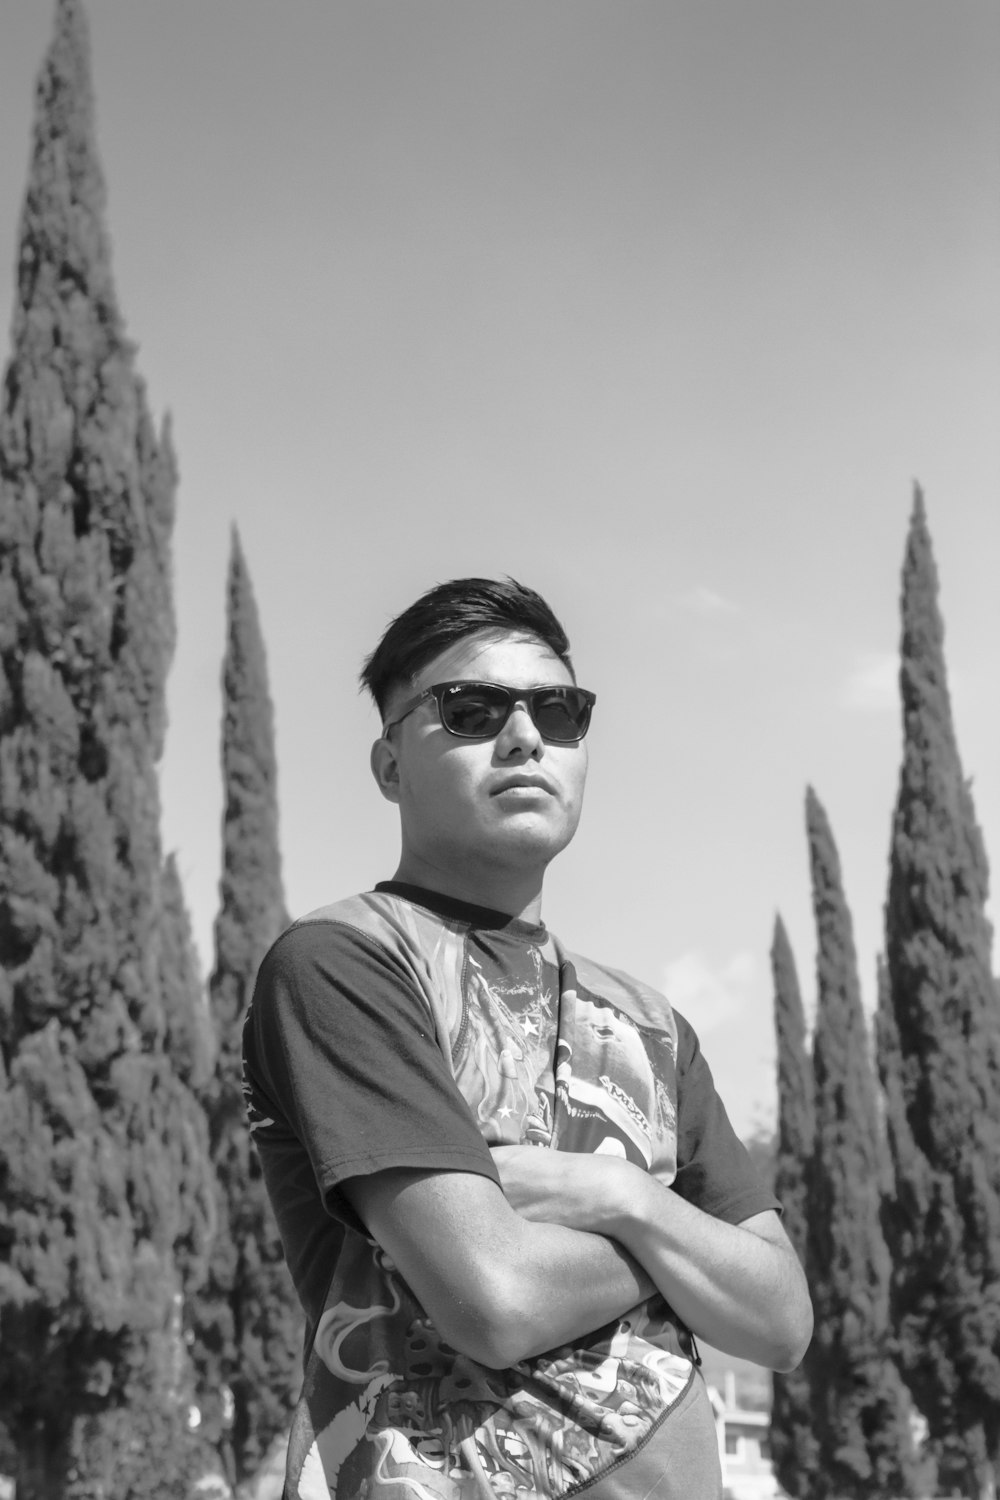 grayscale photo of man wearing sunglasses and crew neck t-shirt